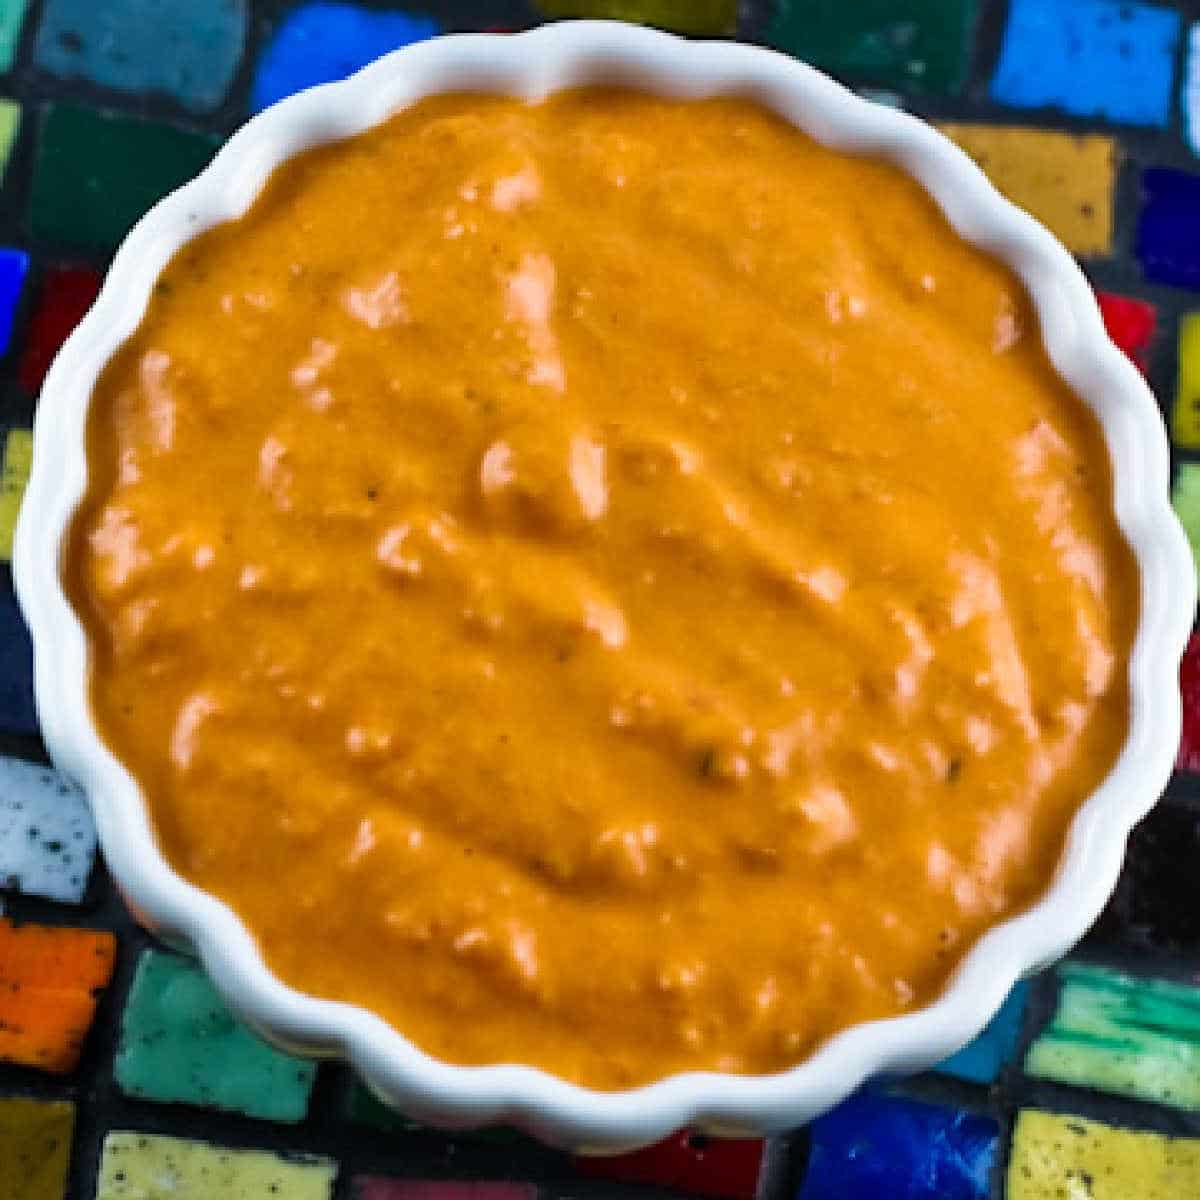 square image for Roasted Red Pepper Sauce shown in bowl on tile